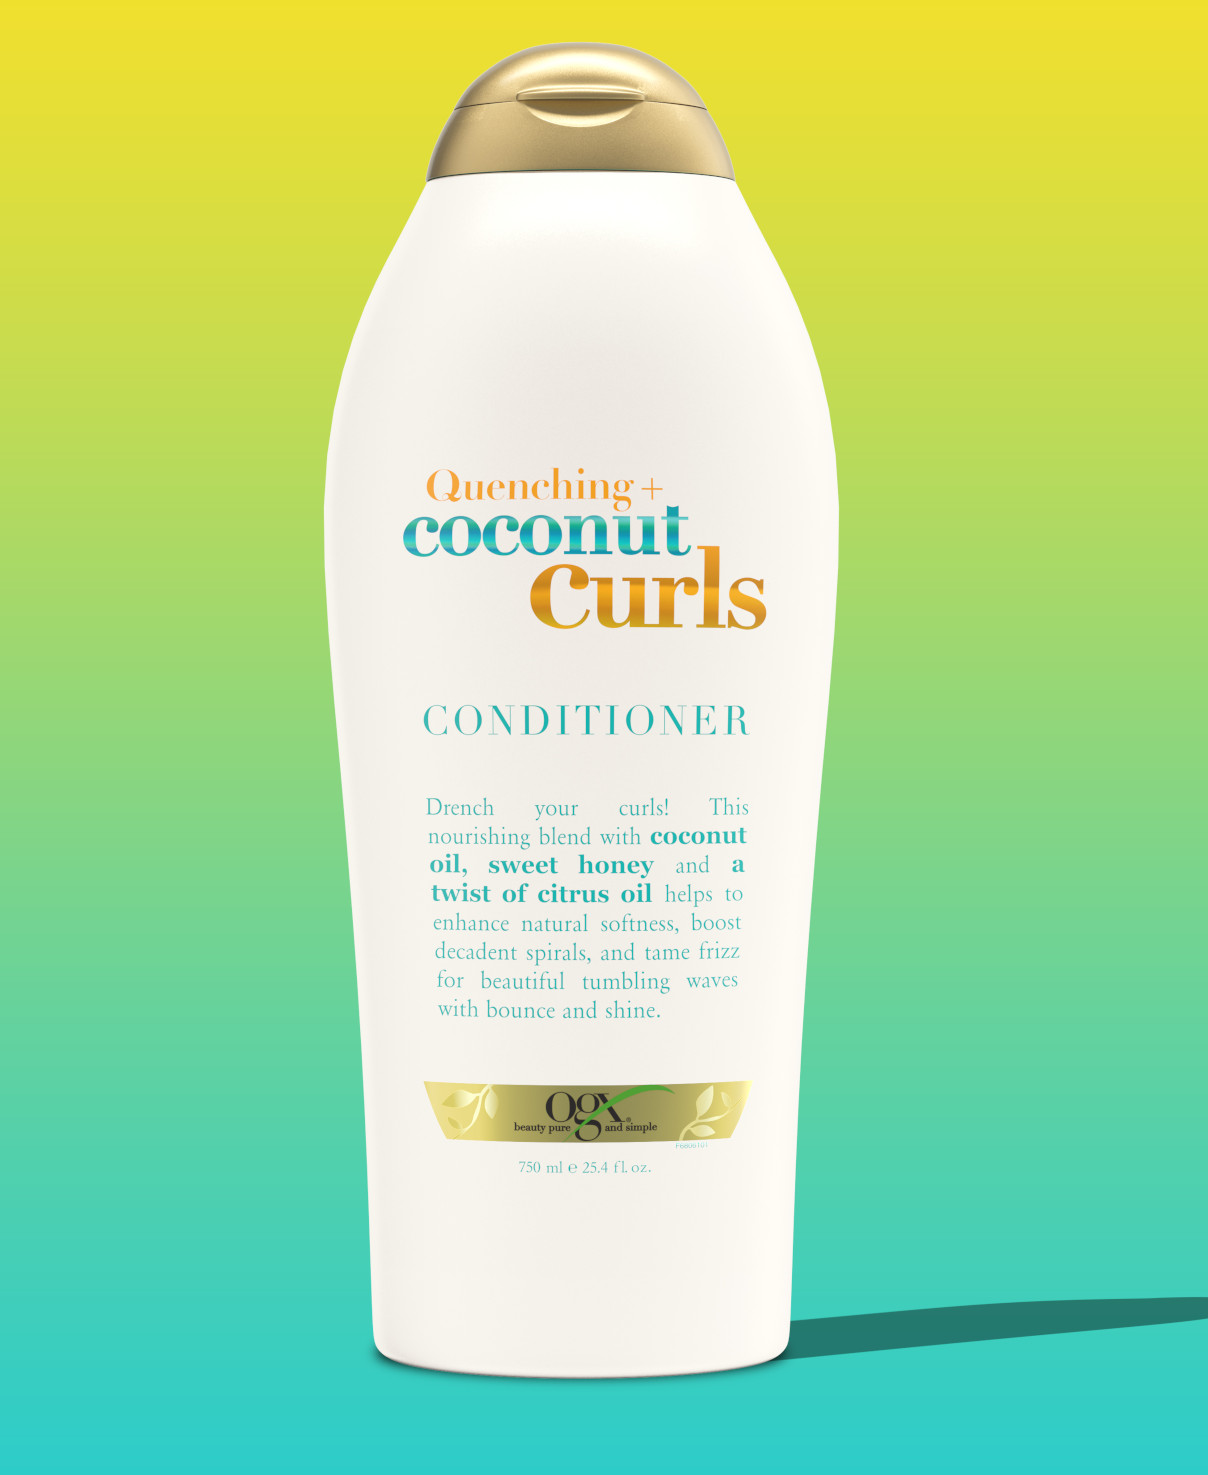 Moisturizing Coconut Conditioner for Curly Hair